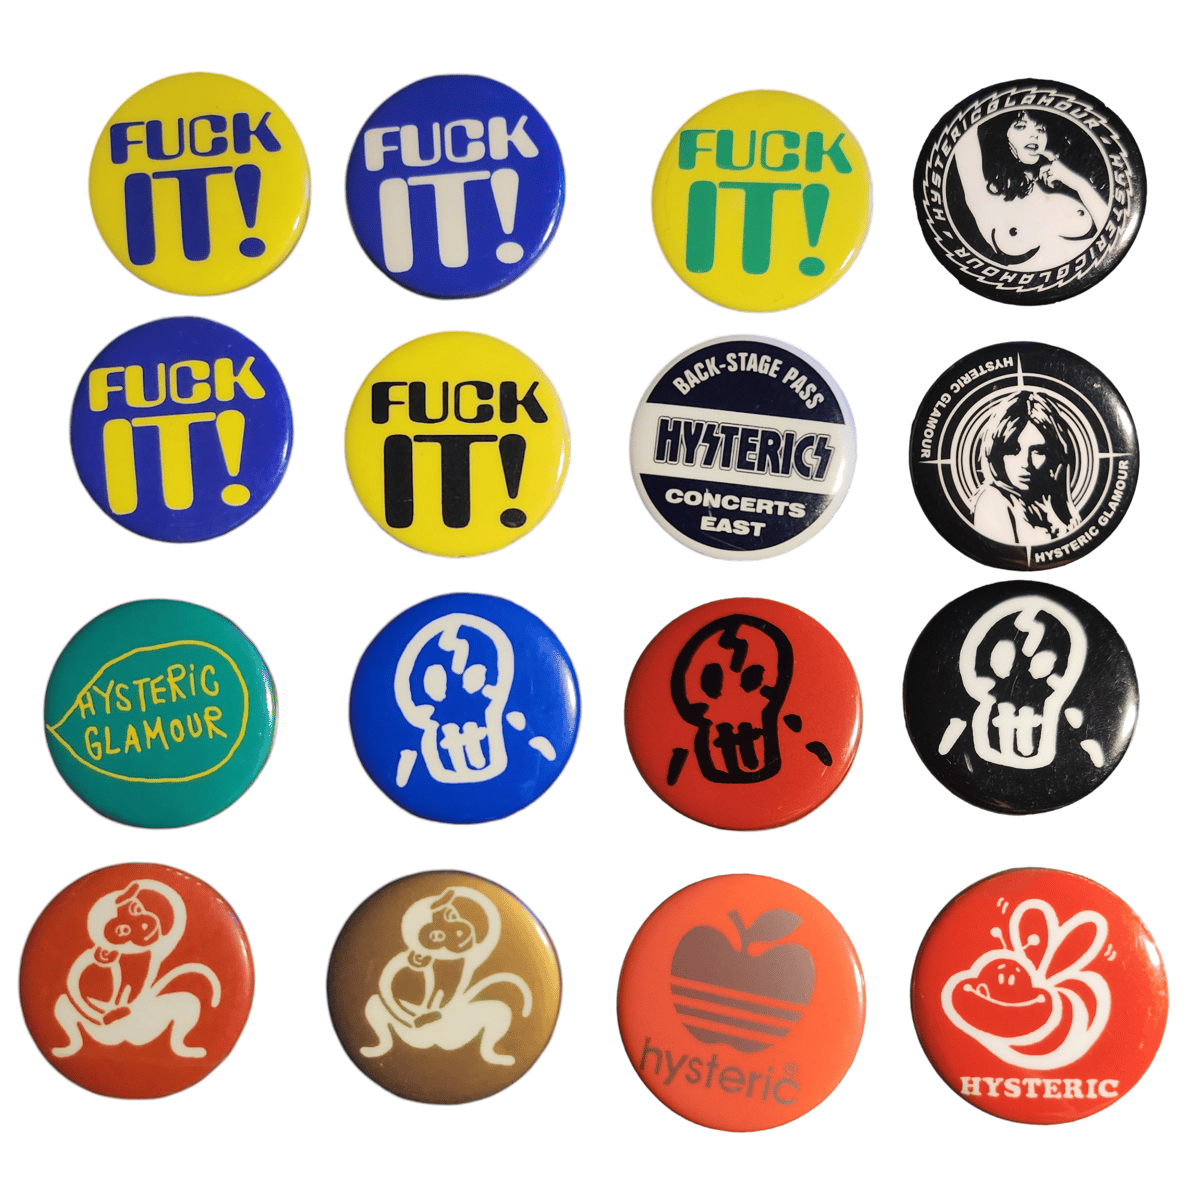 hysteric glamour pins